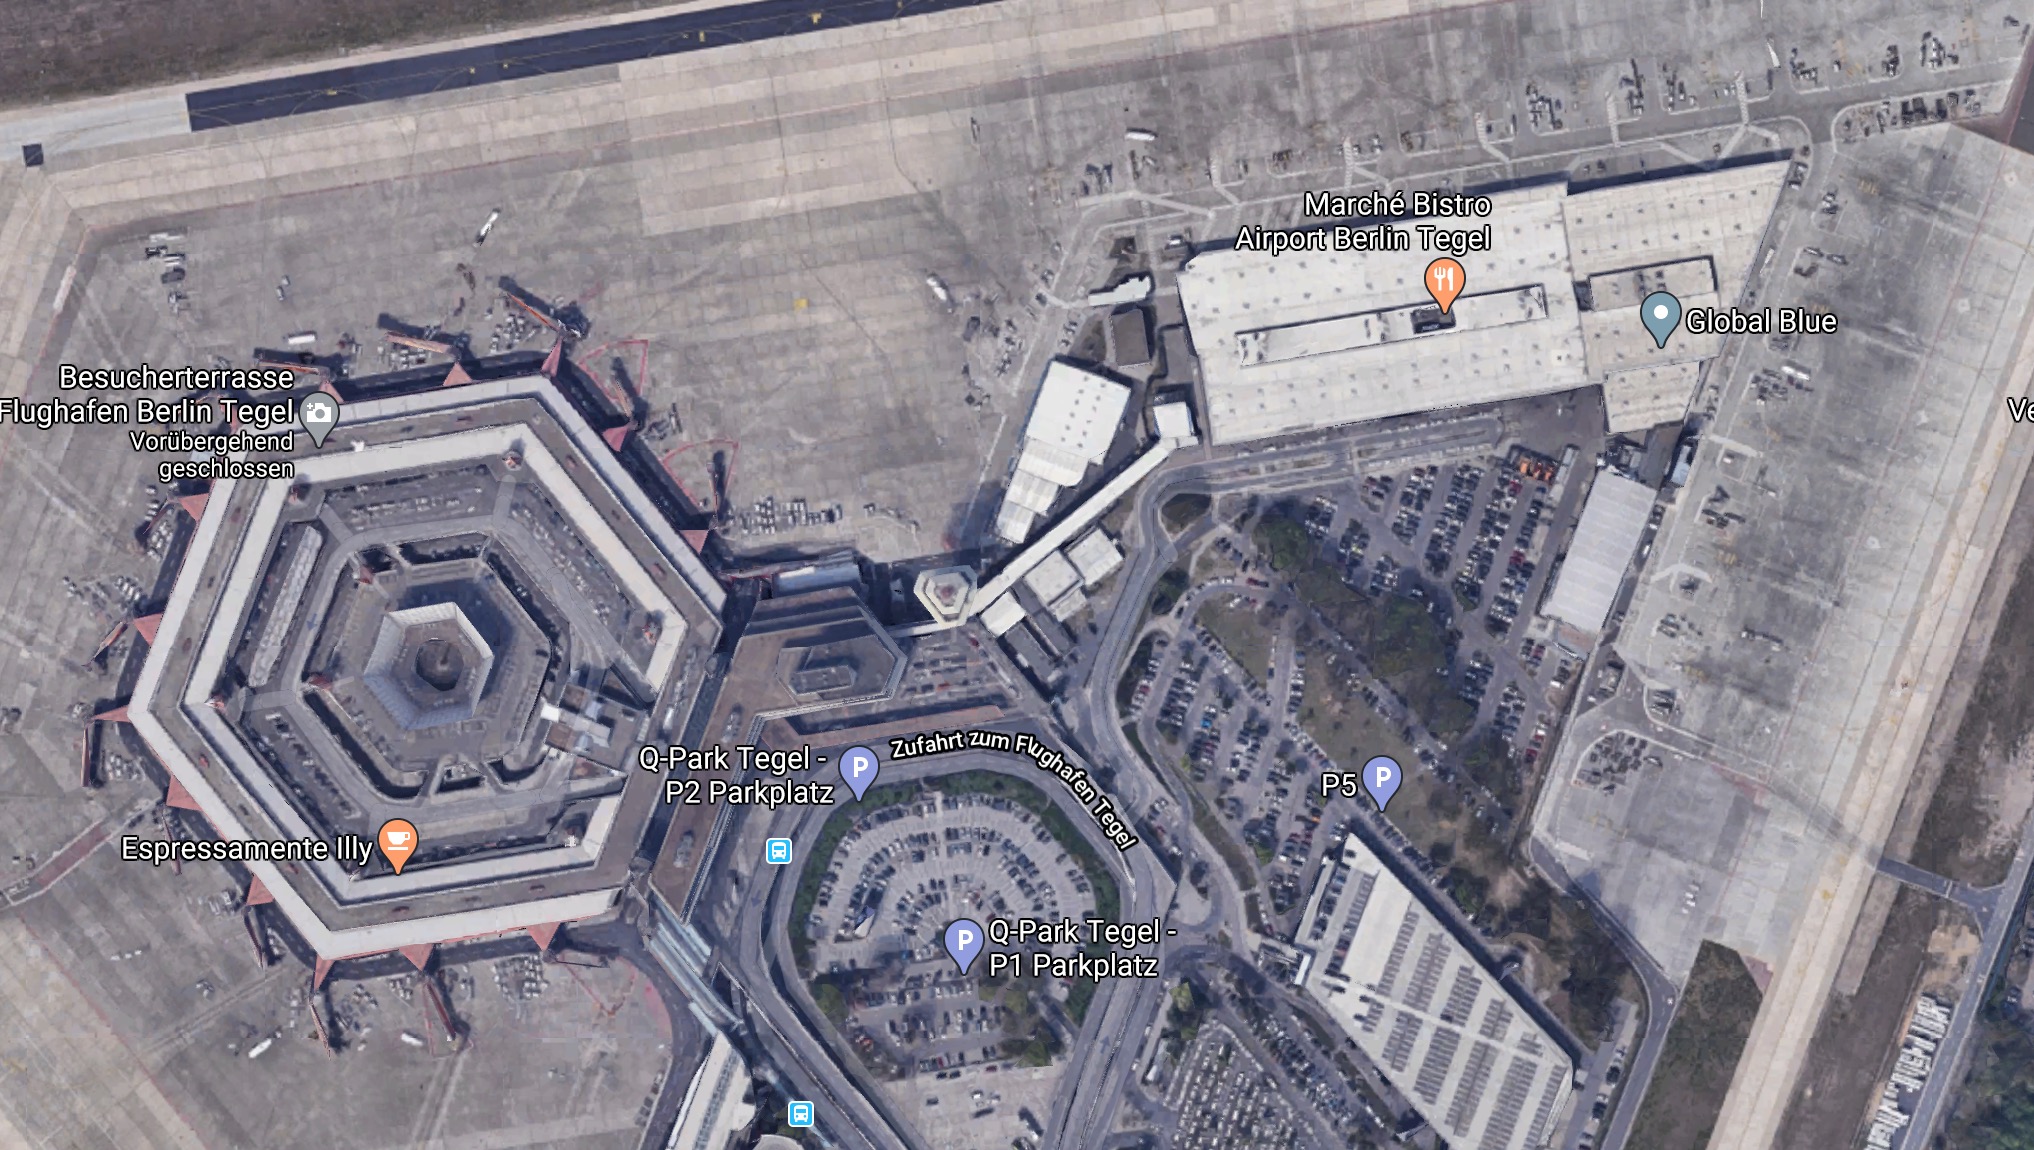 bark hoppe Bliv oppe Julian Röpcke on Twitter: "@googlemaps Berlin Tegel Airport. Latest Google  Earth image vs. current Google Maps image. Guess, you can spot the  difference. https://t.co/CHtBhCK6UI" / Twitter